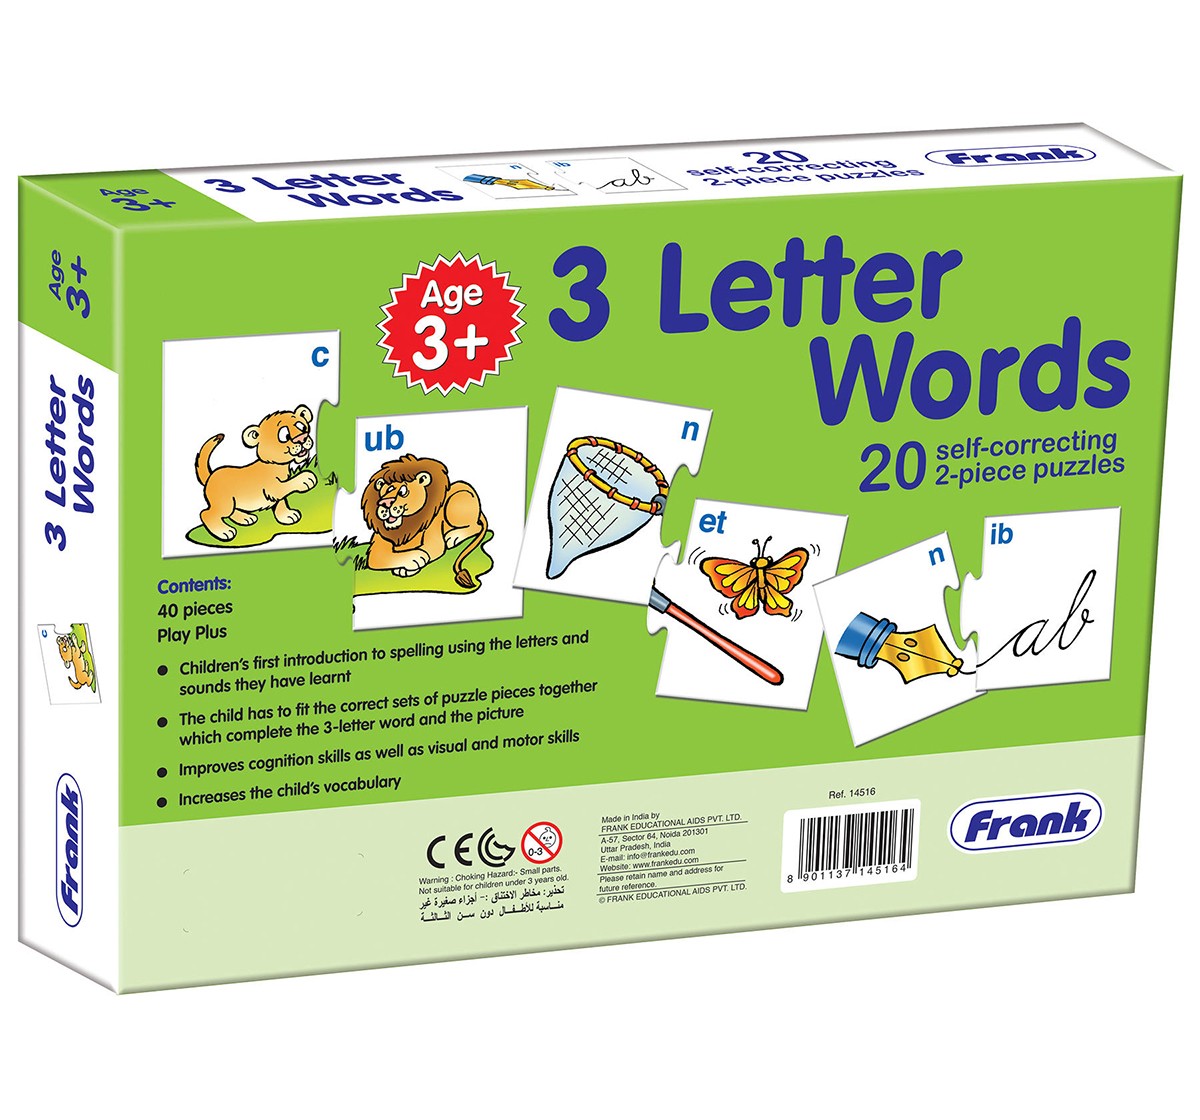 Frank 3 Letter Words Puzzles for Kids age 3Y+ 